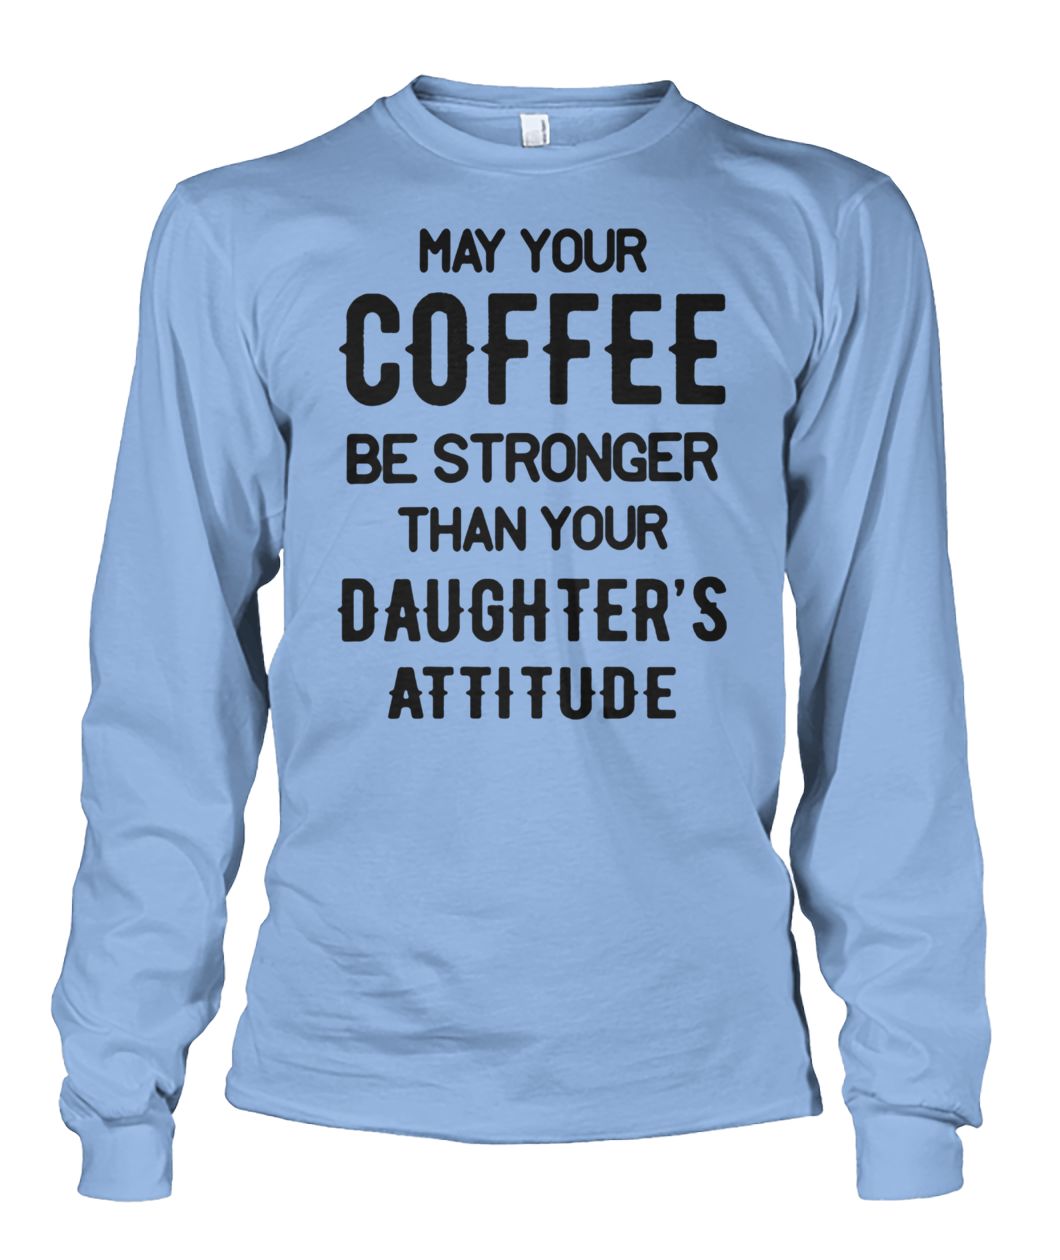 May your coffee be stronger than your daughter's attitude unisex long sleeve